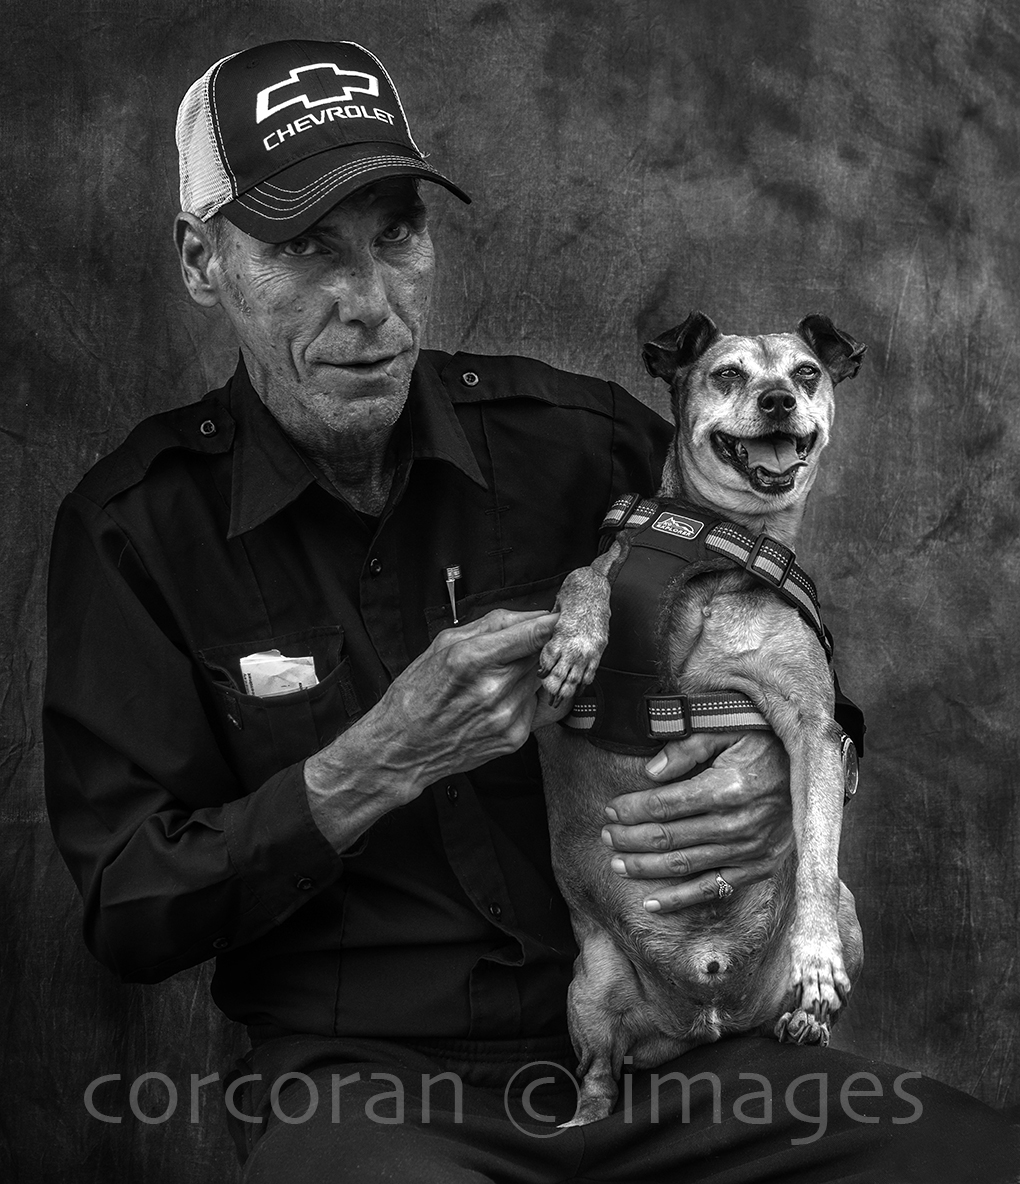 Black and white image of a formal portrait of a man and his dog